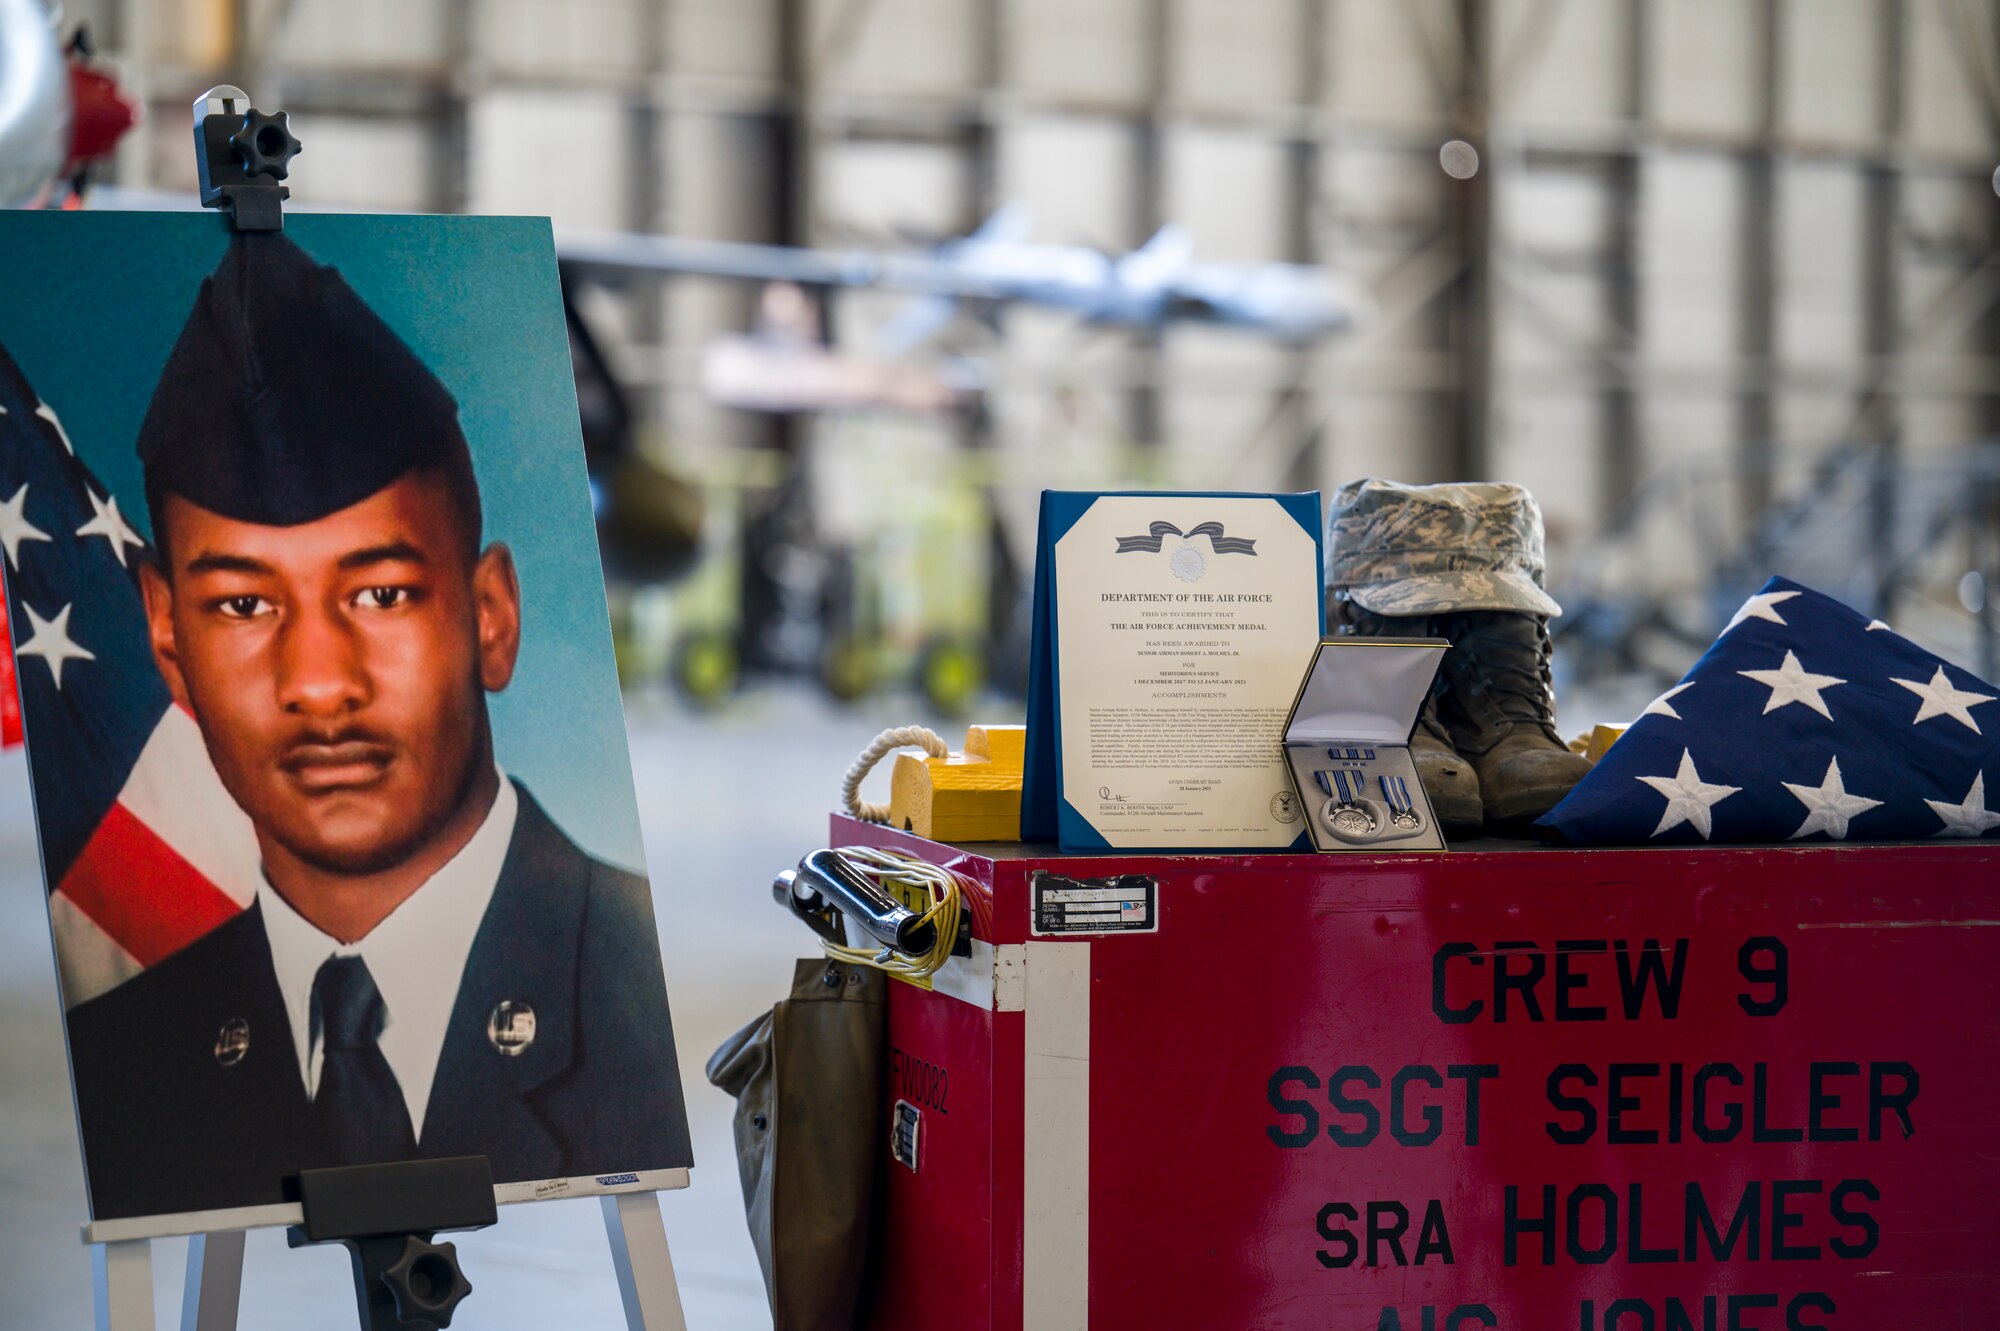 Airmen from 412th Maintenance Squadron held a memorial ceremony for Senior Airman Robert Holmes, Jr., at Edwards Air Force Base, California, Jan. 29. Holmes was assigned to the 416th Aircraft Maintenance Unit Weapons Section, where he worked as a weapons load crew team member on a fleet of 25 F-16 Fighting Falcons. Holmes was  awarded Air Force Achievement Medal posthumously. (Air Force photo by Giancarlo Casem)